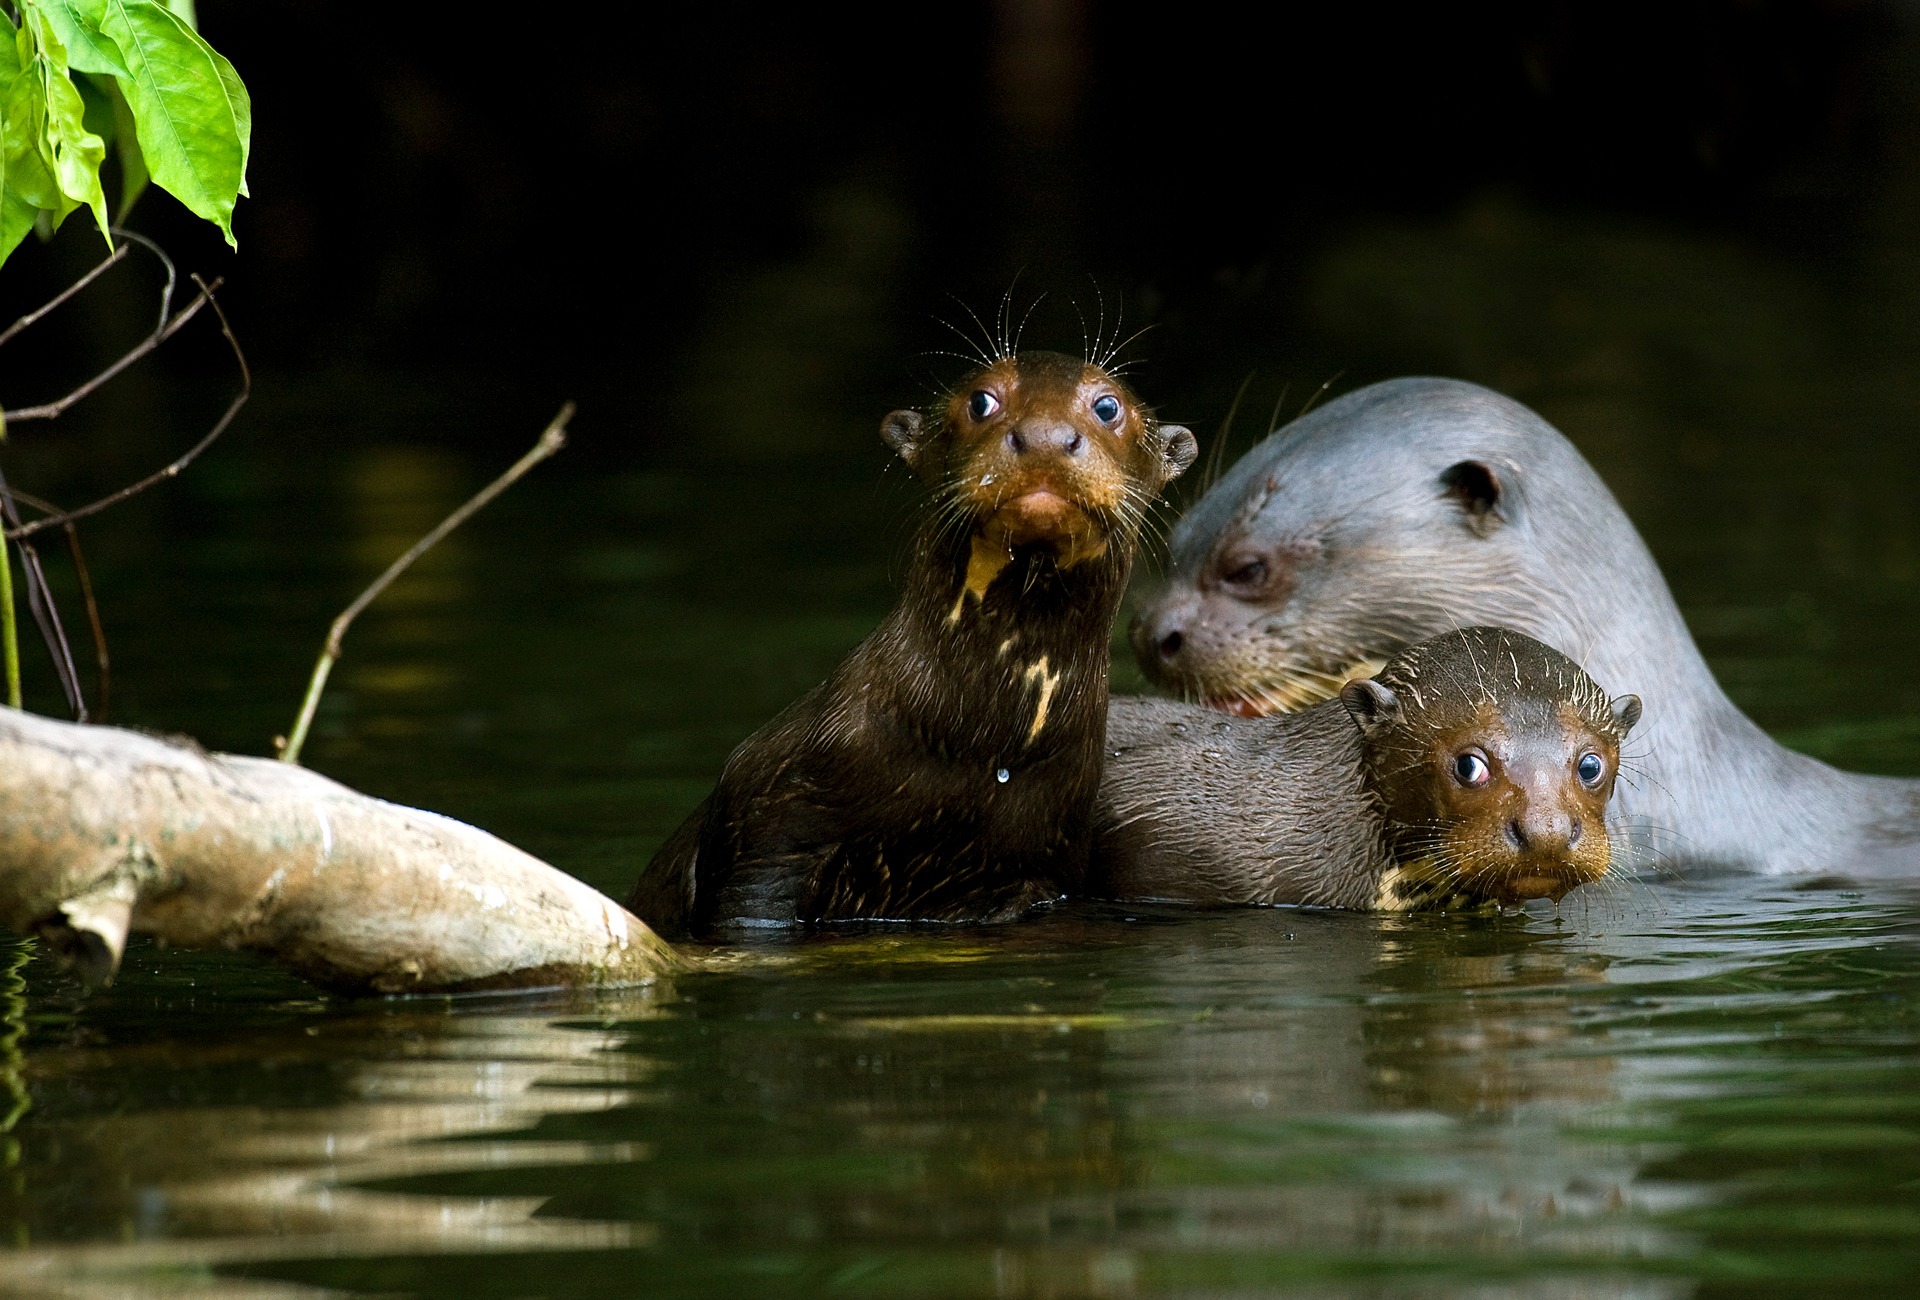 Giant Otter with pups, by Slowmotiongli